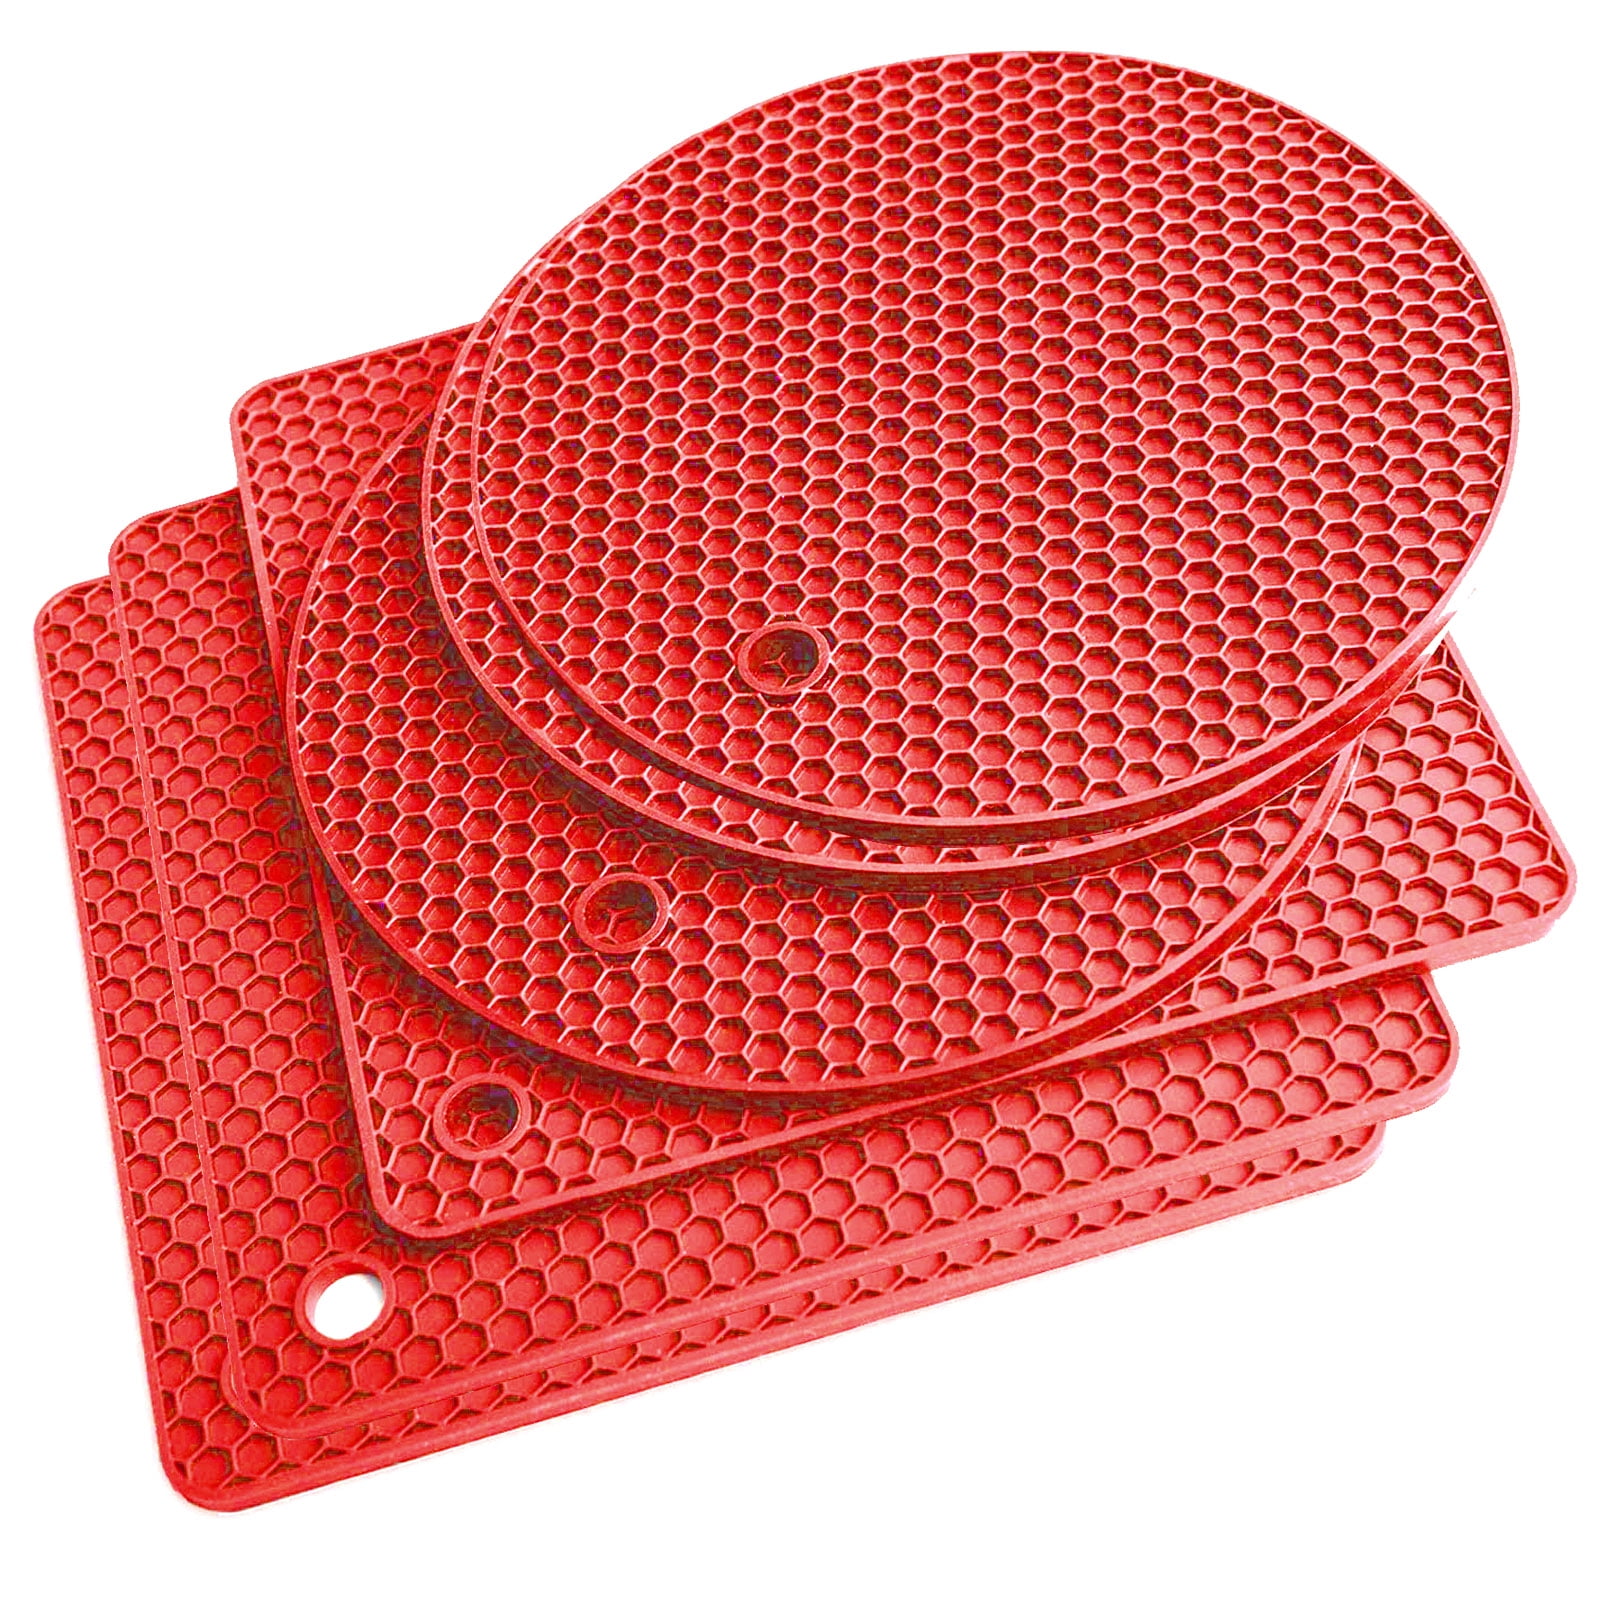 Yesbay 6Pcs Silicone Heat Resistant Honeycomb Pads Non-slip Hot Pot Holder  Drying Mats Potholders Kitchen Tools,Blue 